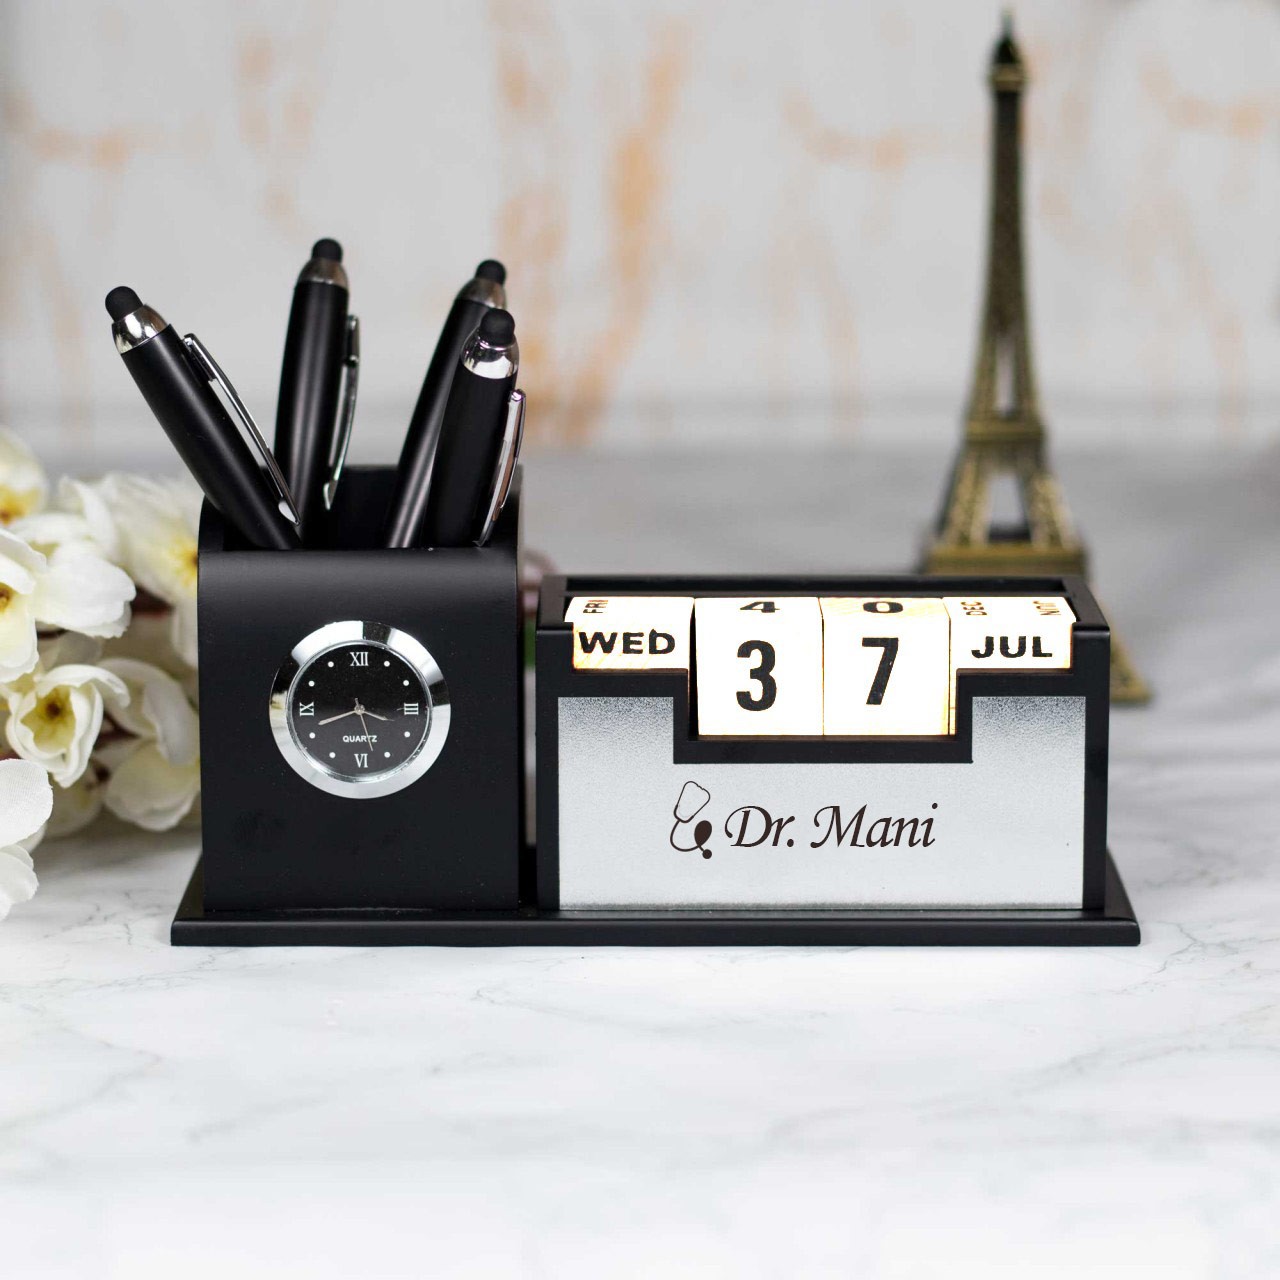 Personalized Table Stand With Calendar & Clock For Doctors